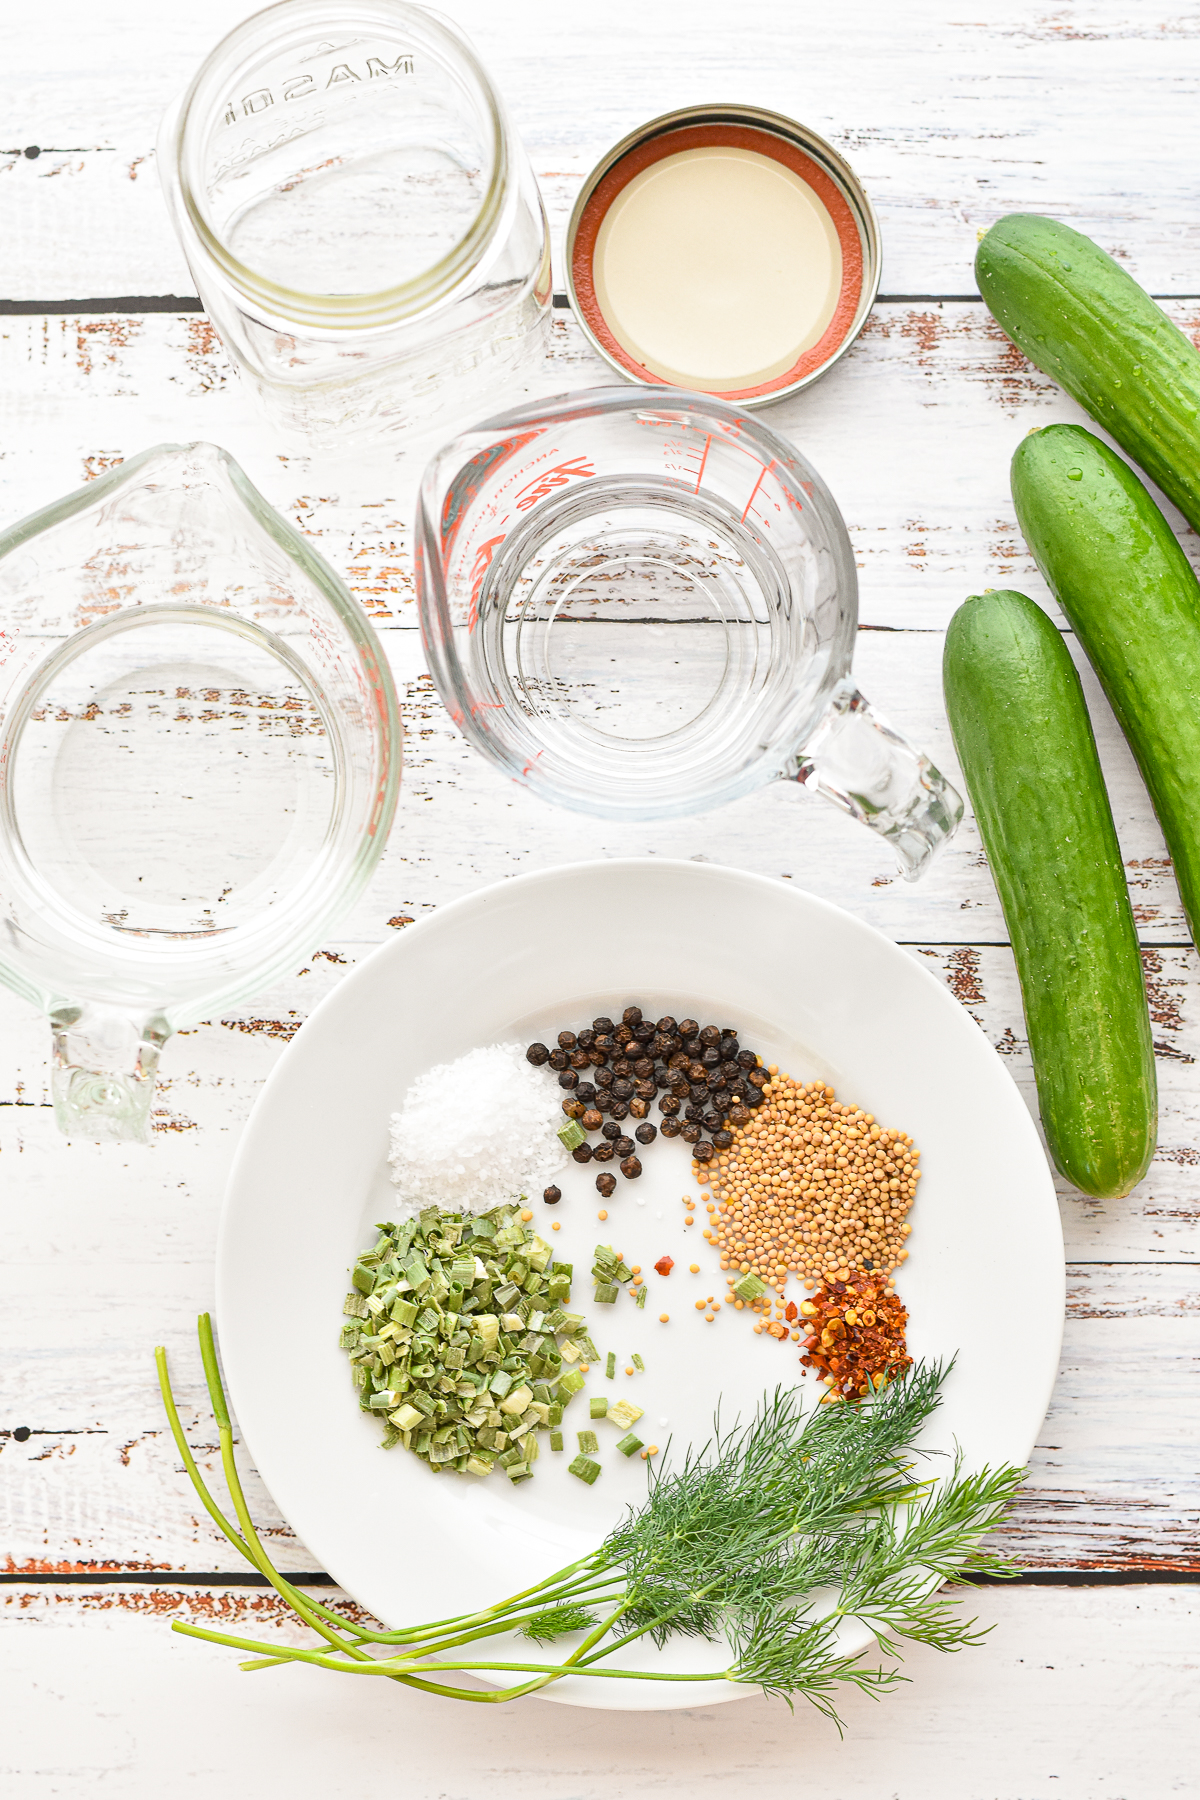 ingredients shot for low FODMAP pickles including mini-cucumbers, vinegar, water, salt, peppercorns, mustard seeds, chili flakes, fresh dill sprigs, and dried chives next to a pint sized jar and lid